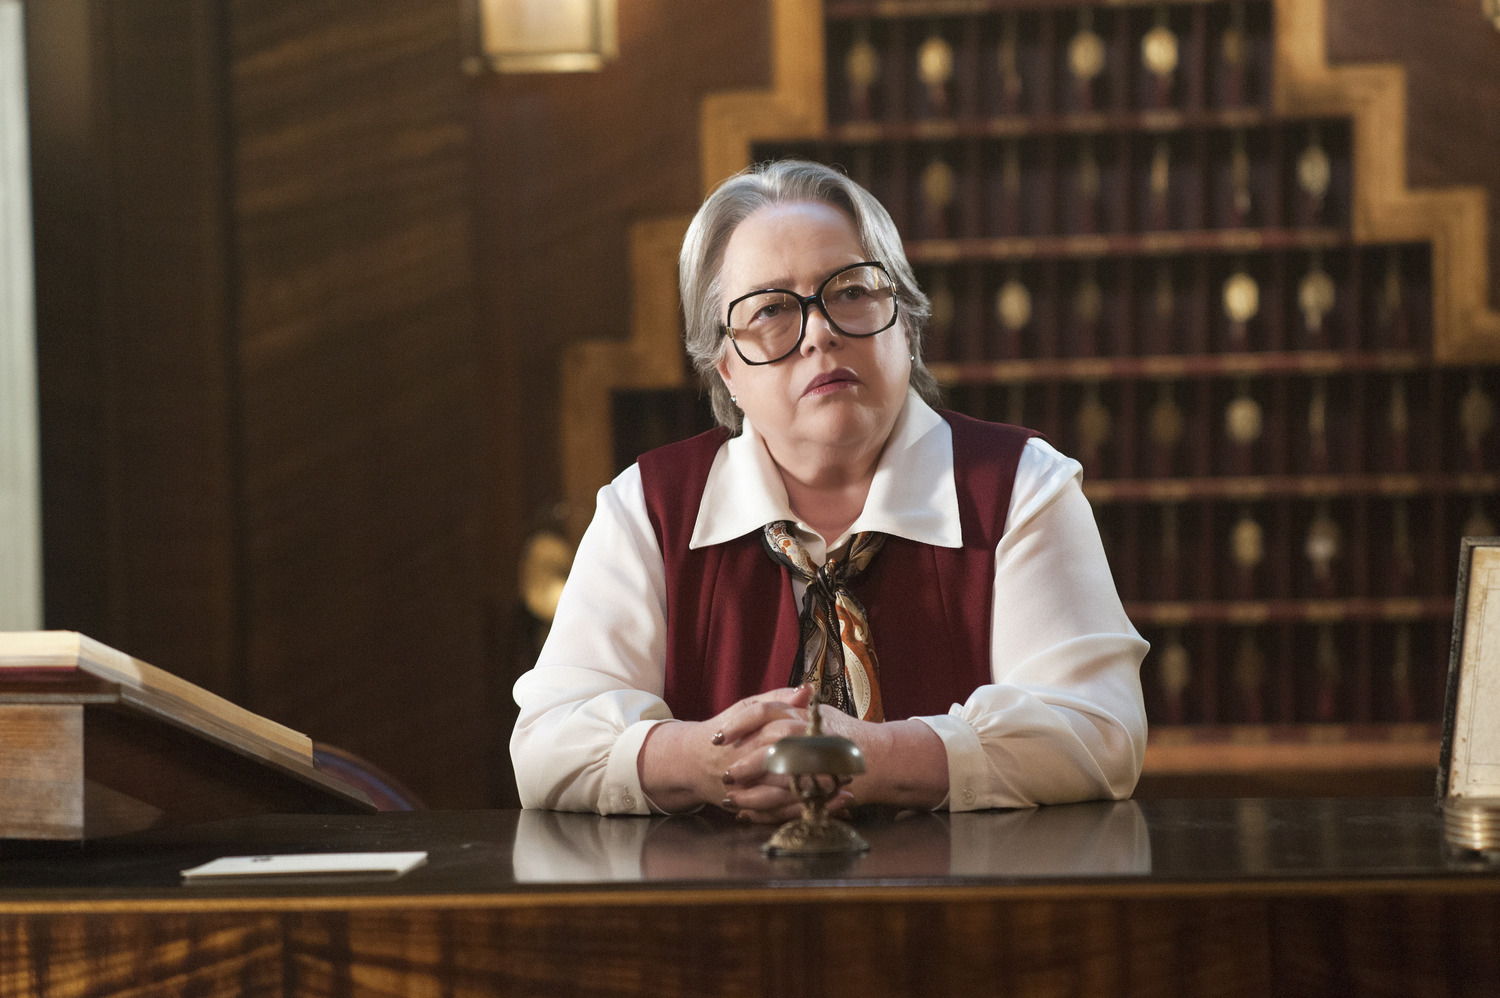 AMERICAN HORROR STORY -- "Checking In" Episode 501 (Airs Wednesday, October 7, 10:00 pm/ep) Pictured: Kathy Bates as Iris. CR: Suzanne Tenner/FX